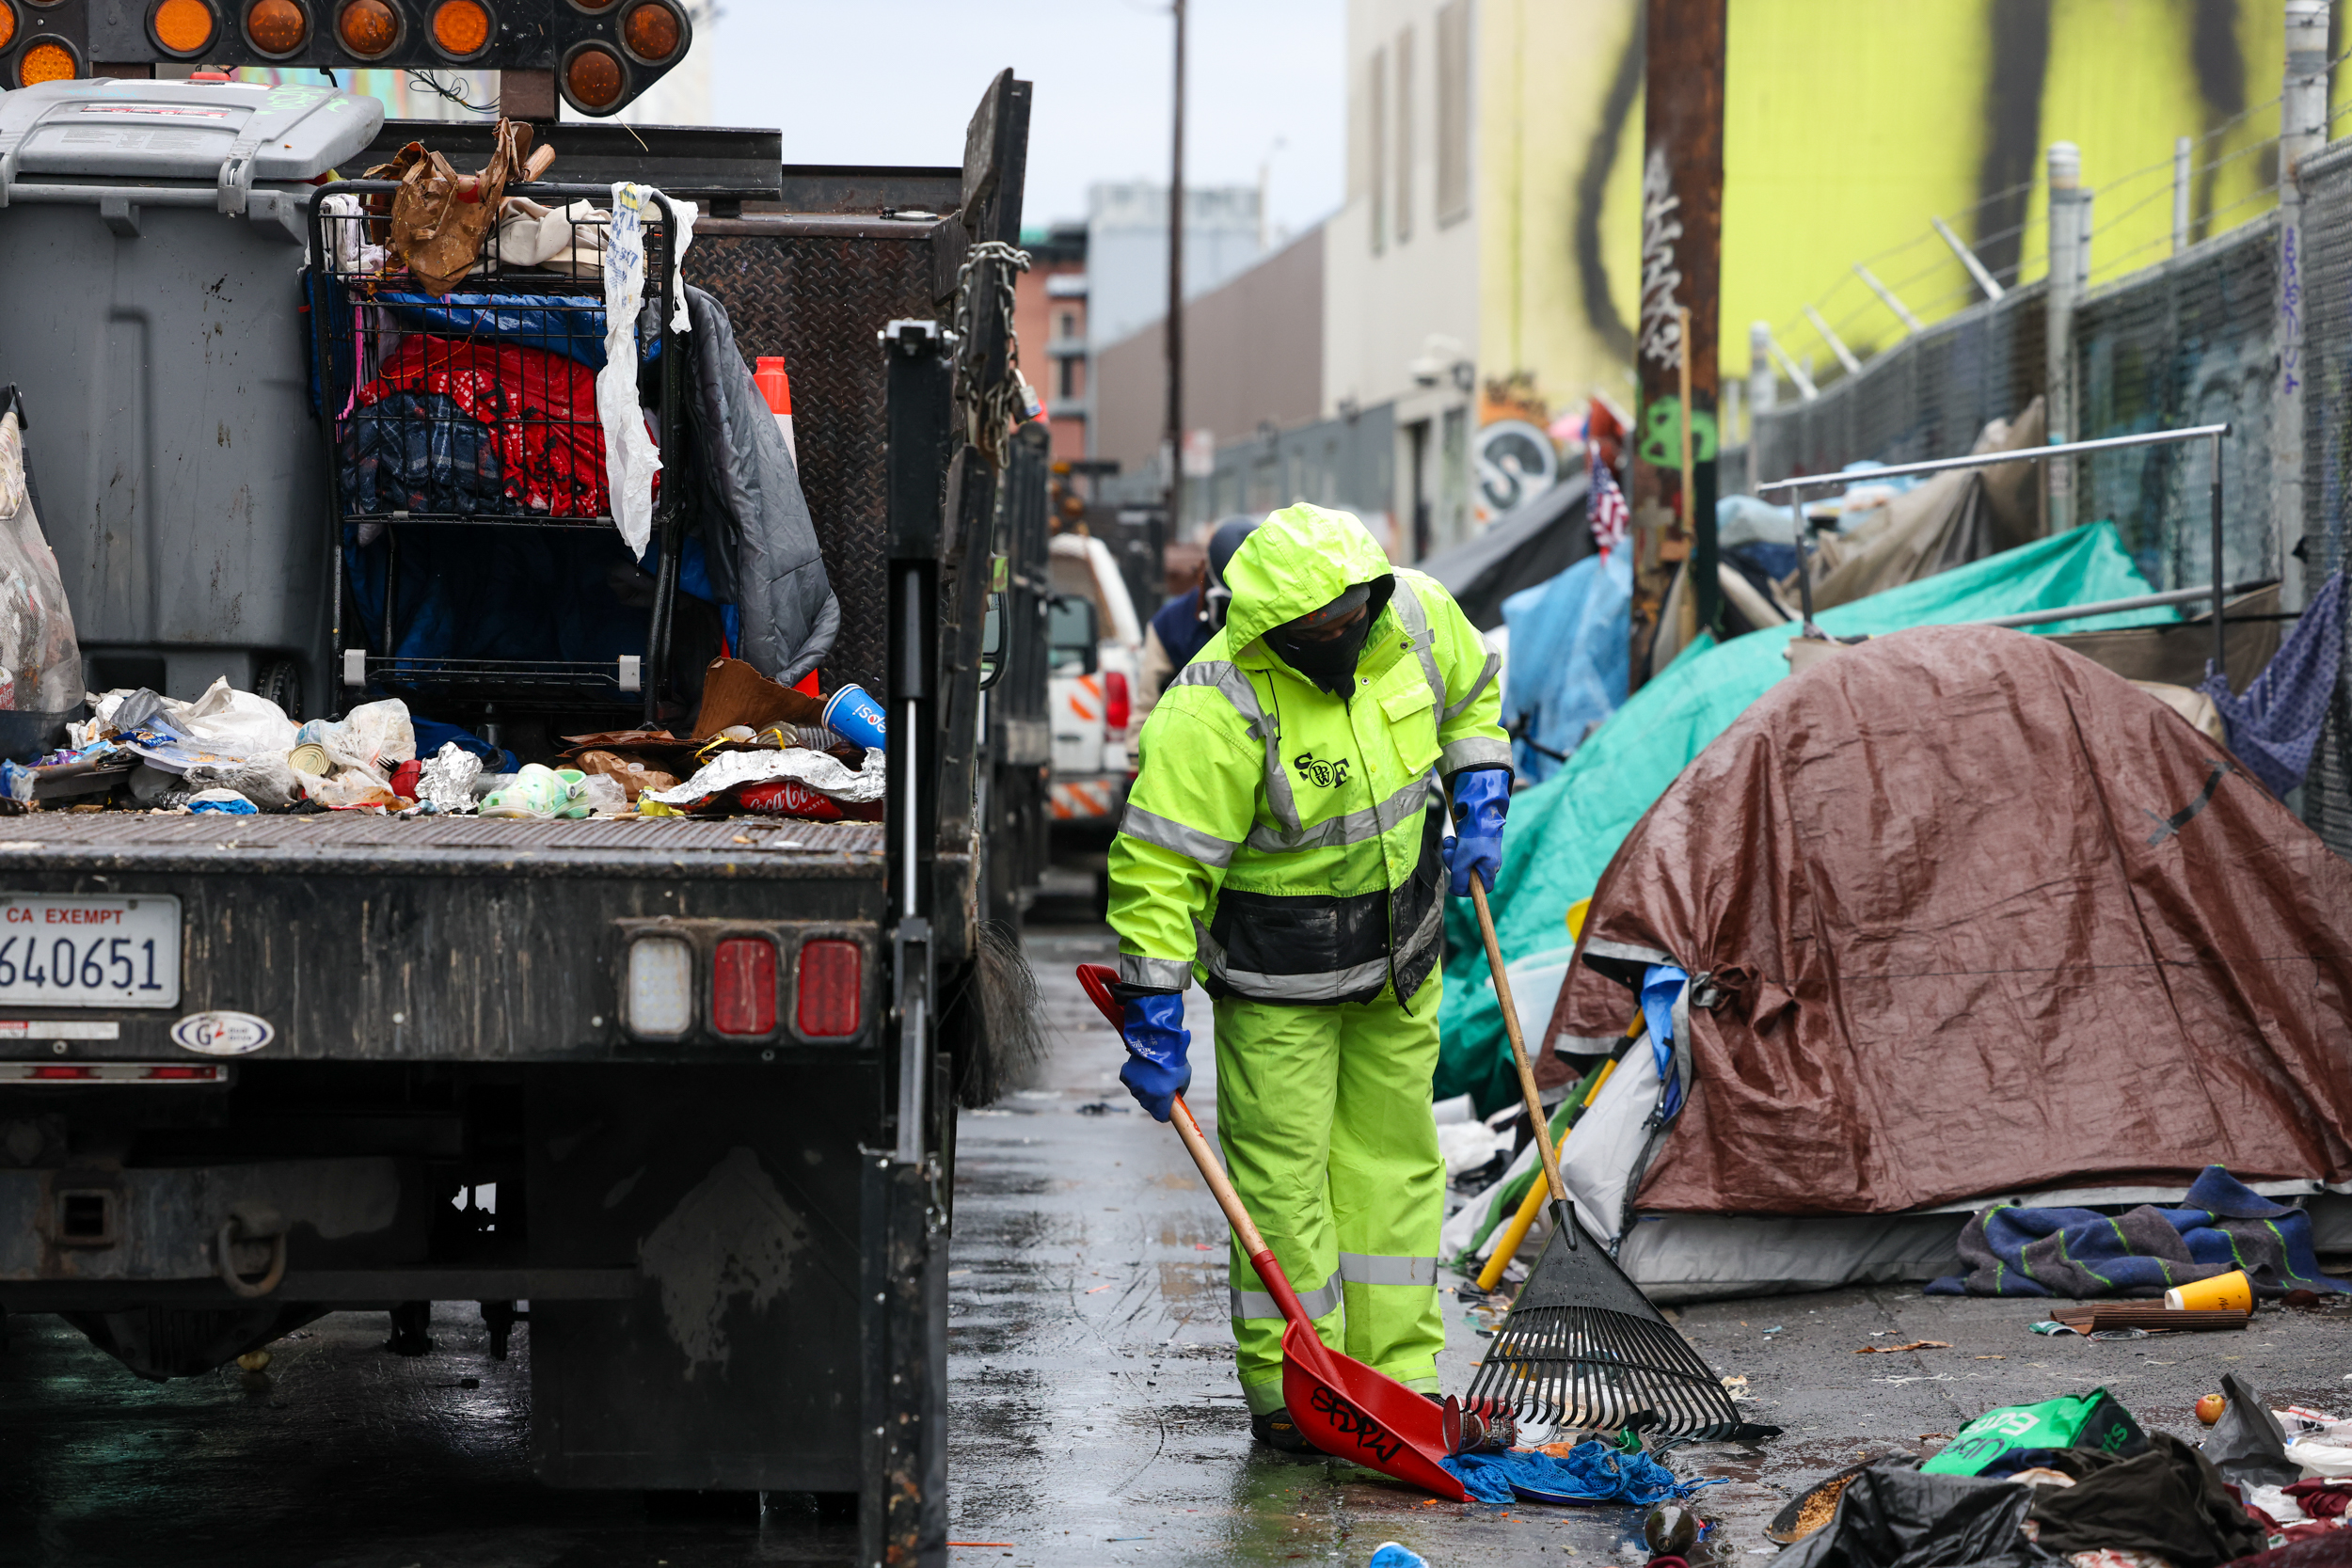 A worker in a bright yellow rain suit uses a shovel and rake to clean a trash-littered street beside a sanitation truck and a makeshift tent encampment.